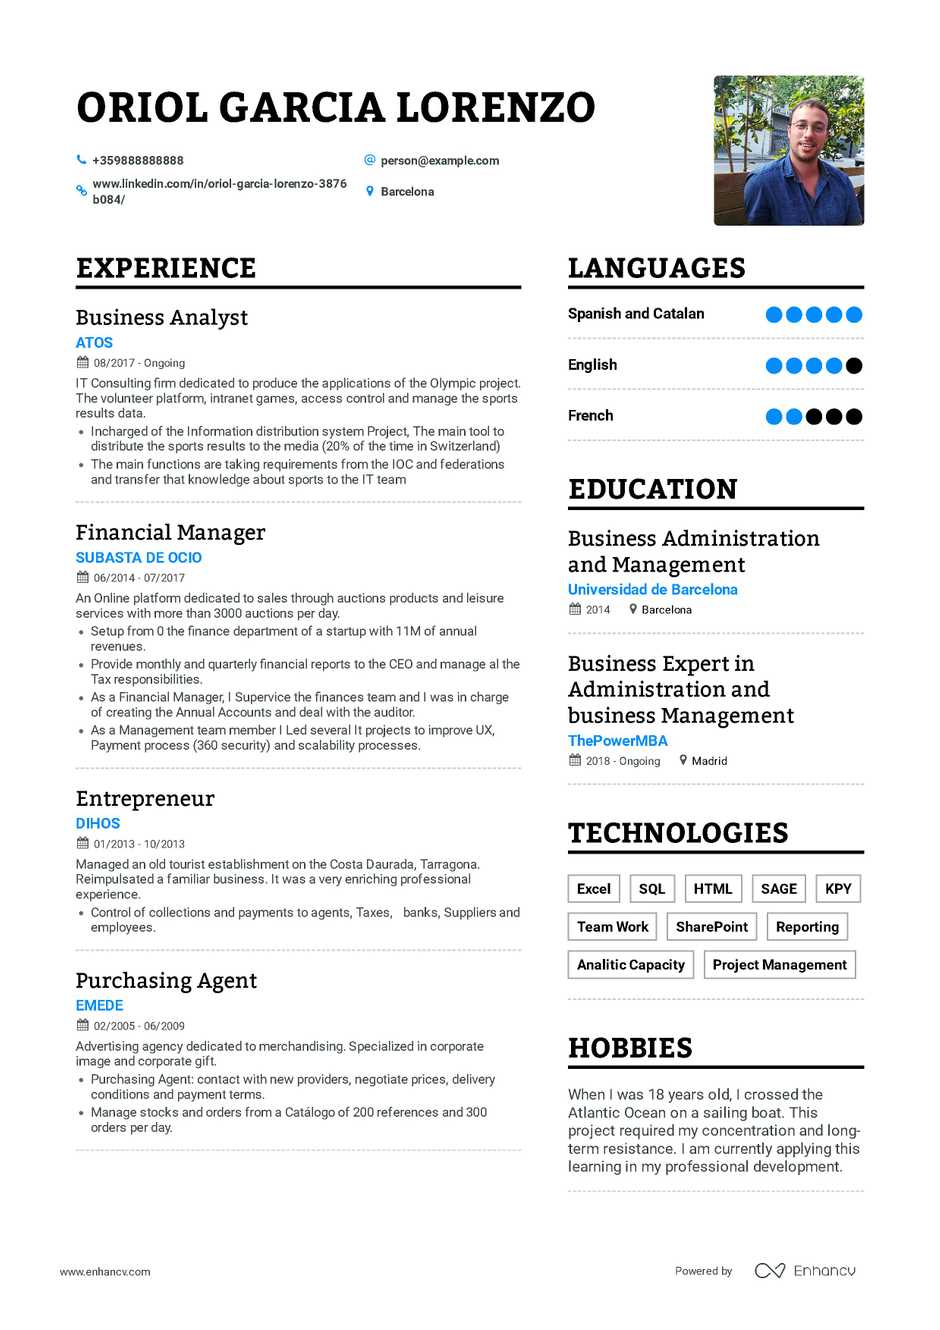 business analyst resume example and guide for 2019